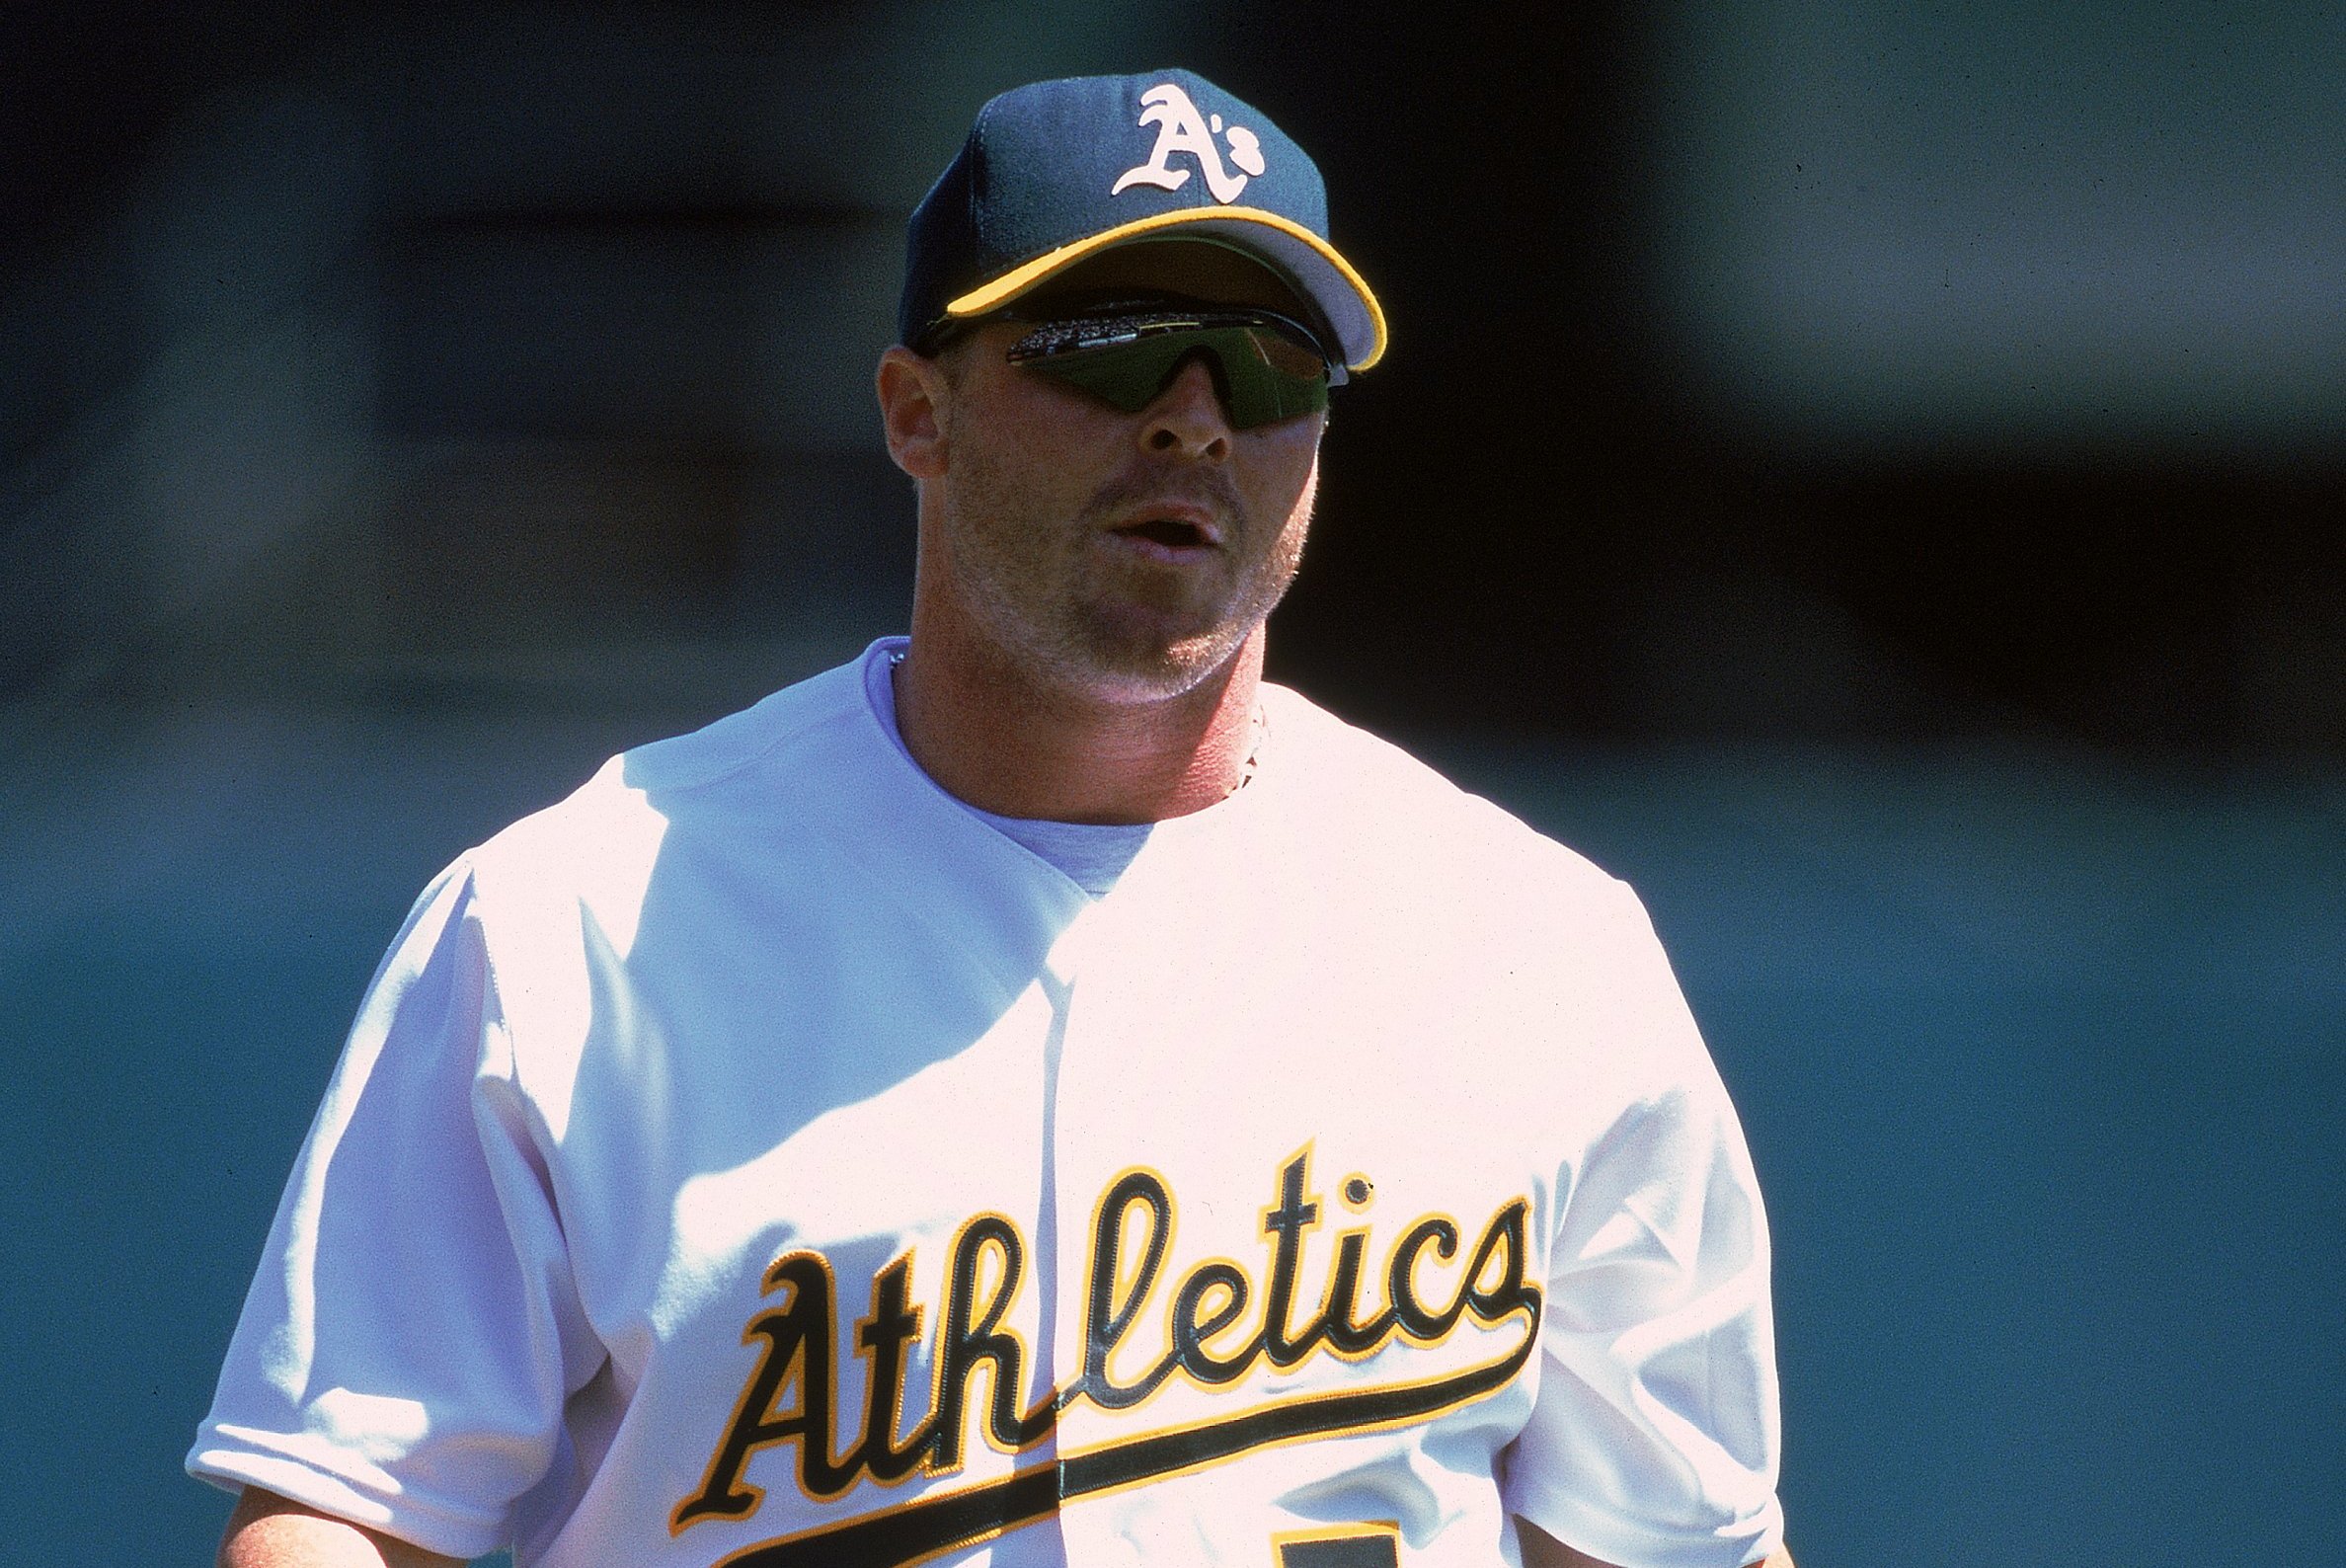 Jeremy Giambi had freak baseball accident months before suicide